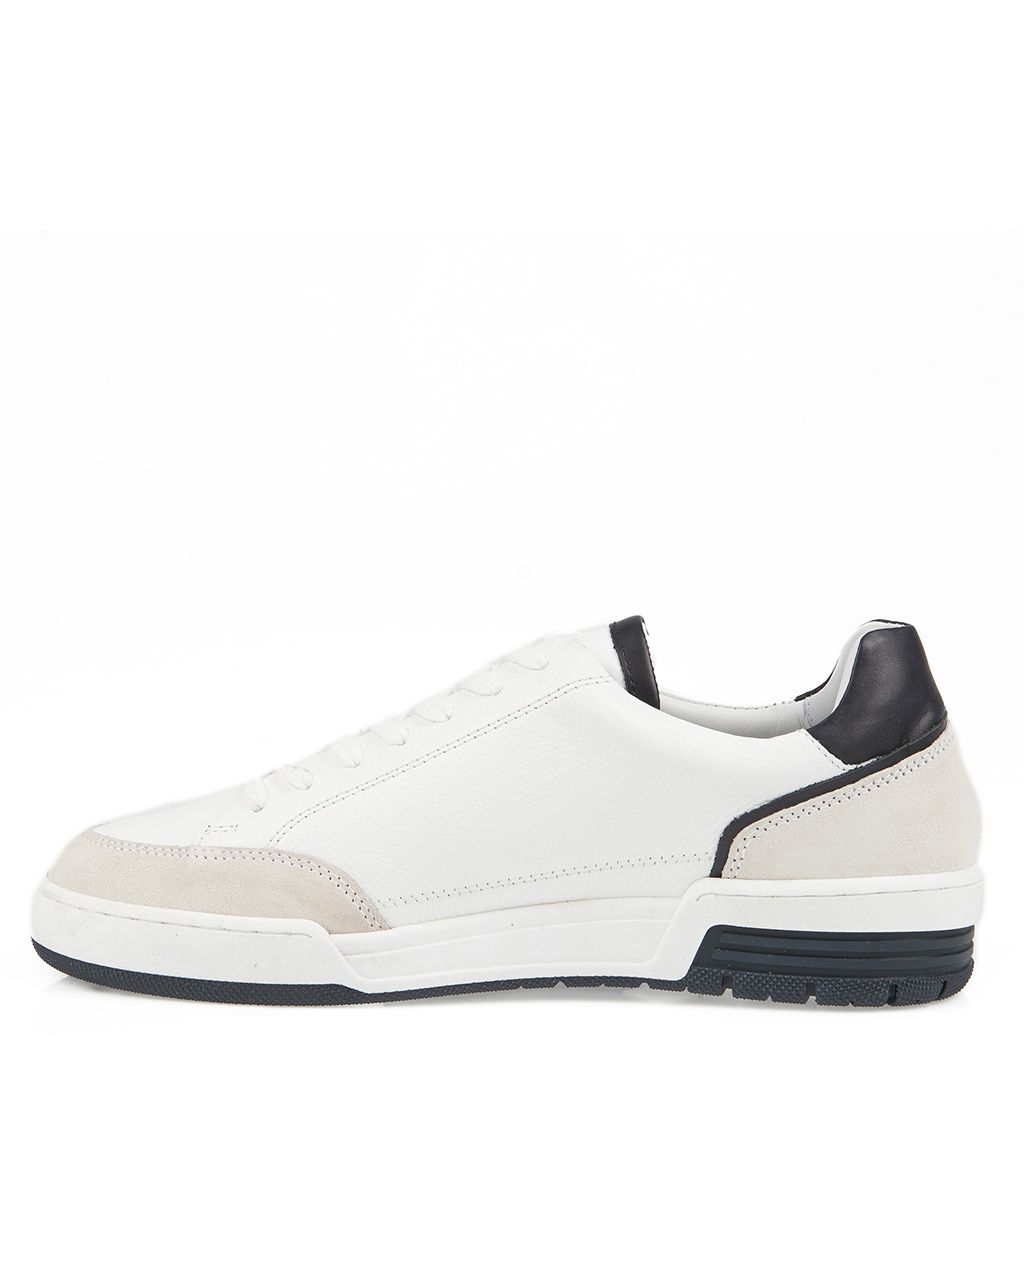 Campbell Classic Sneakers Donkerblauw uni 075978-002-40